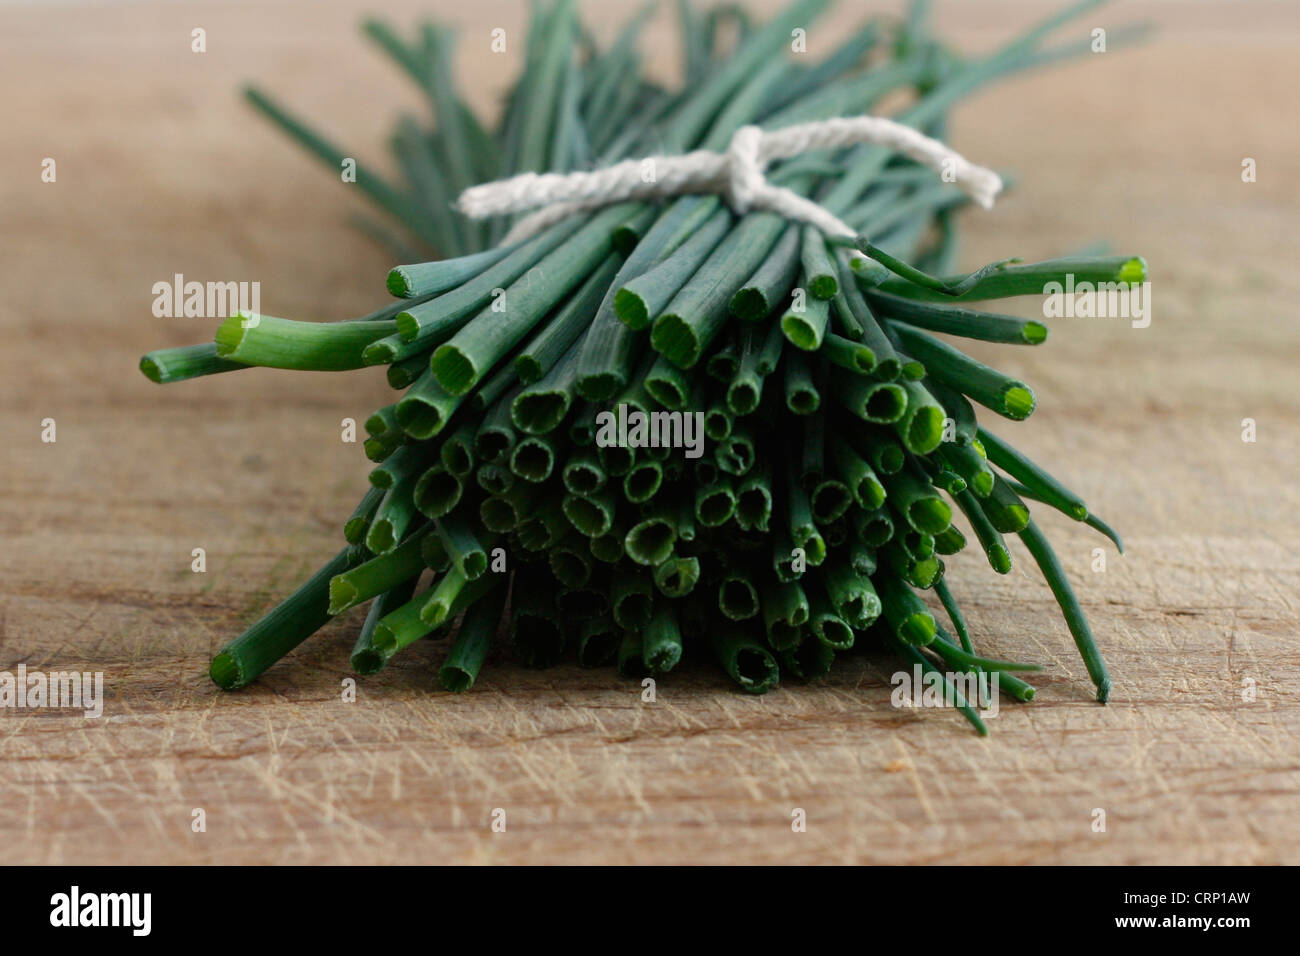 Chives on a wooden surface Stock Photo